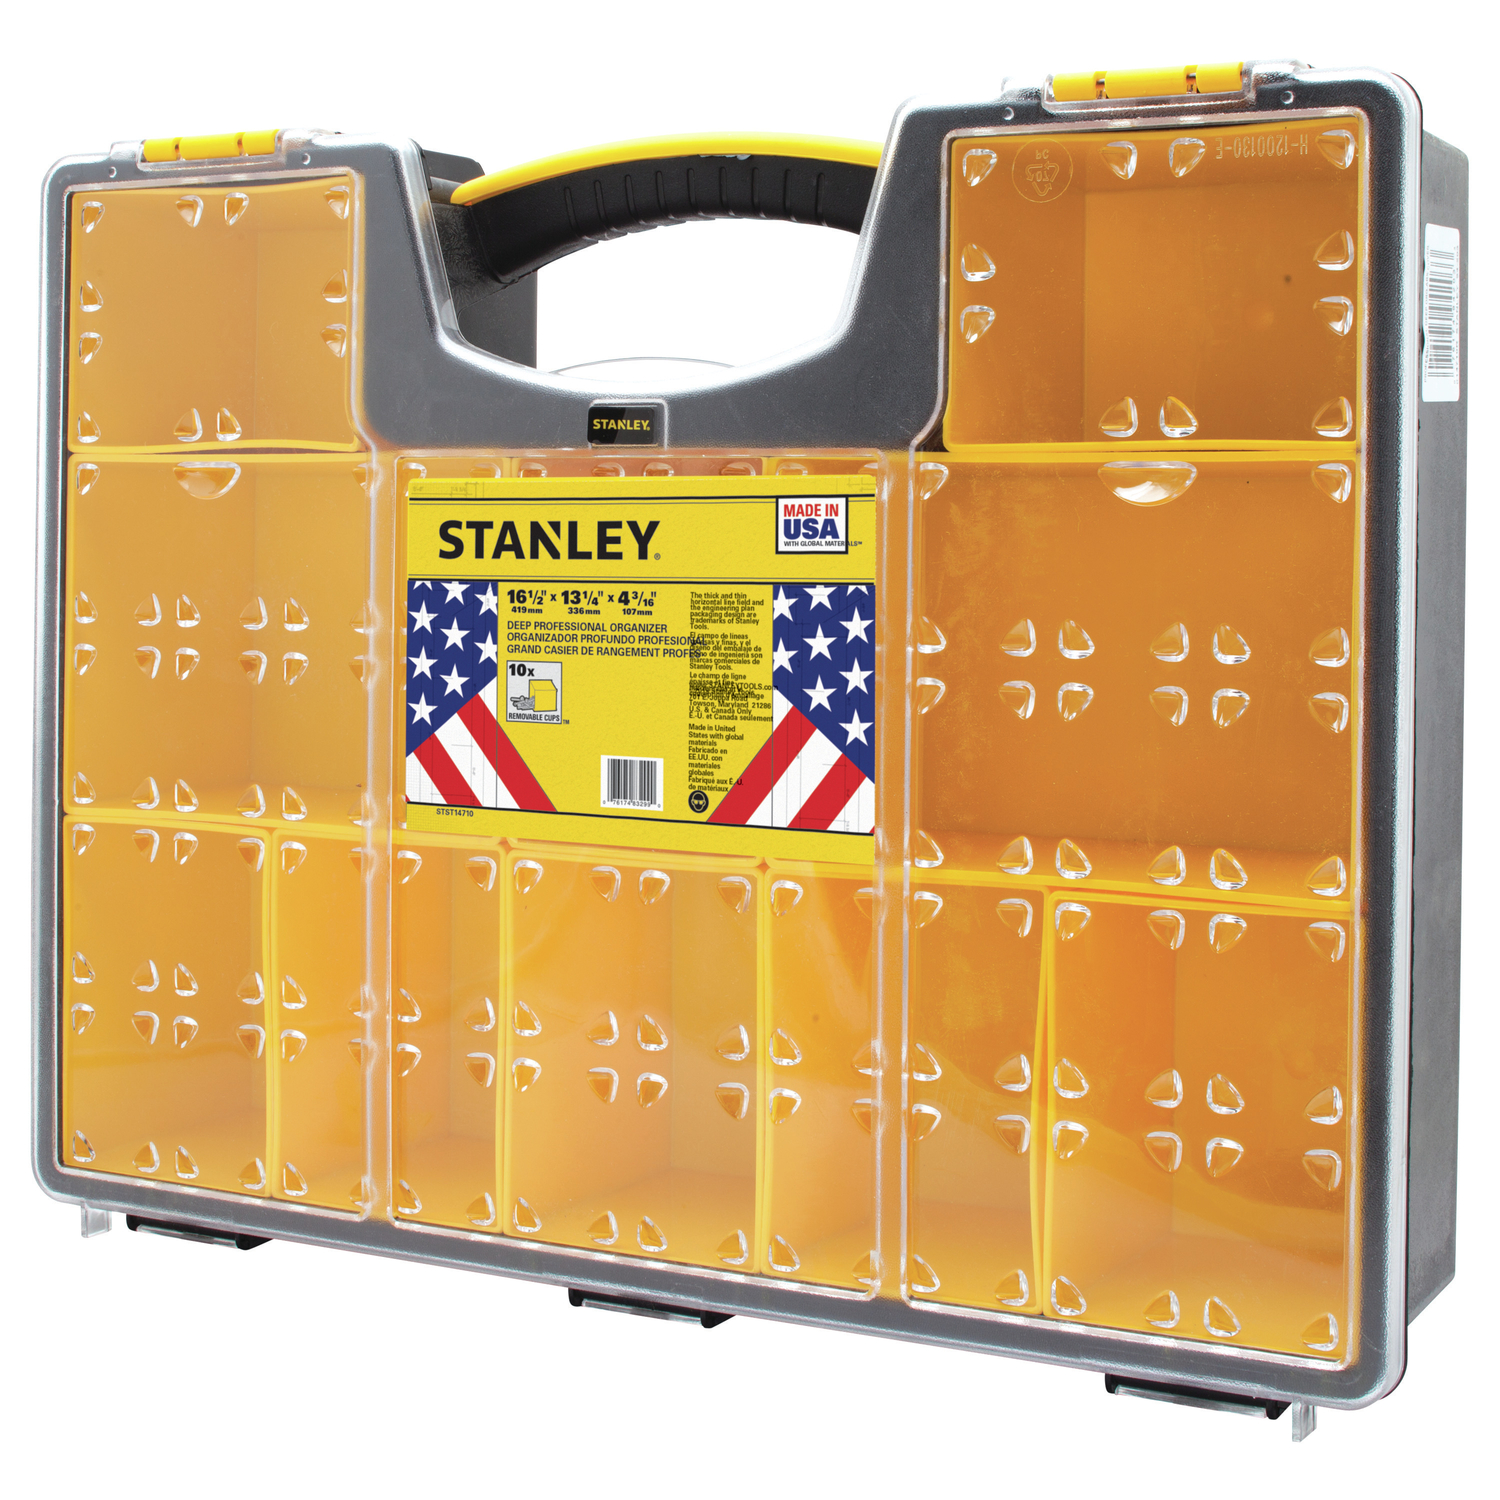 Simple diy storage rack for Stanley small parts organizers : r